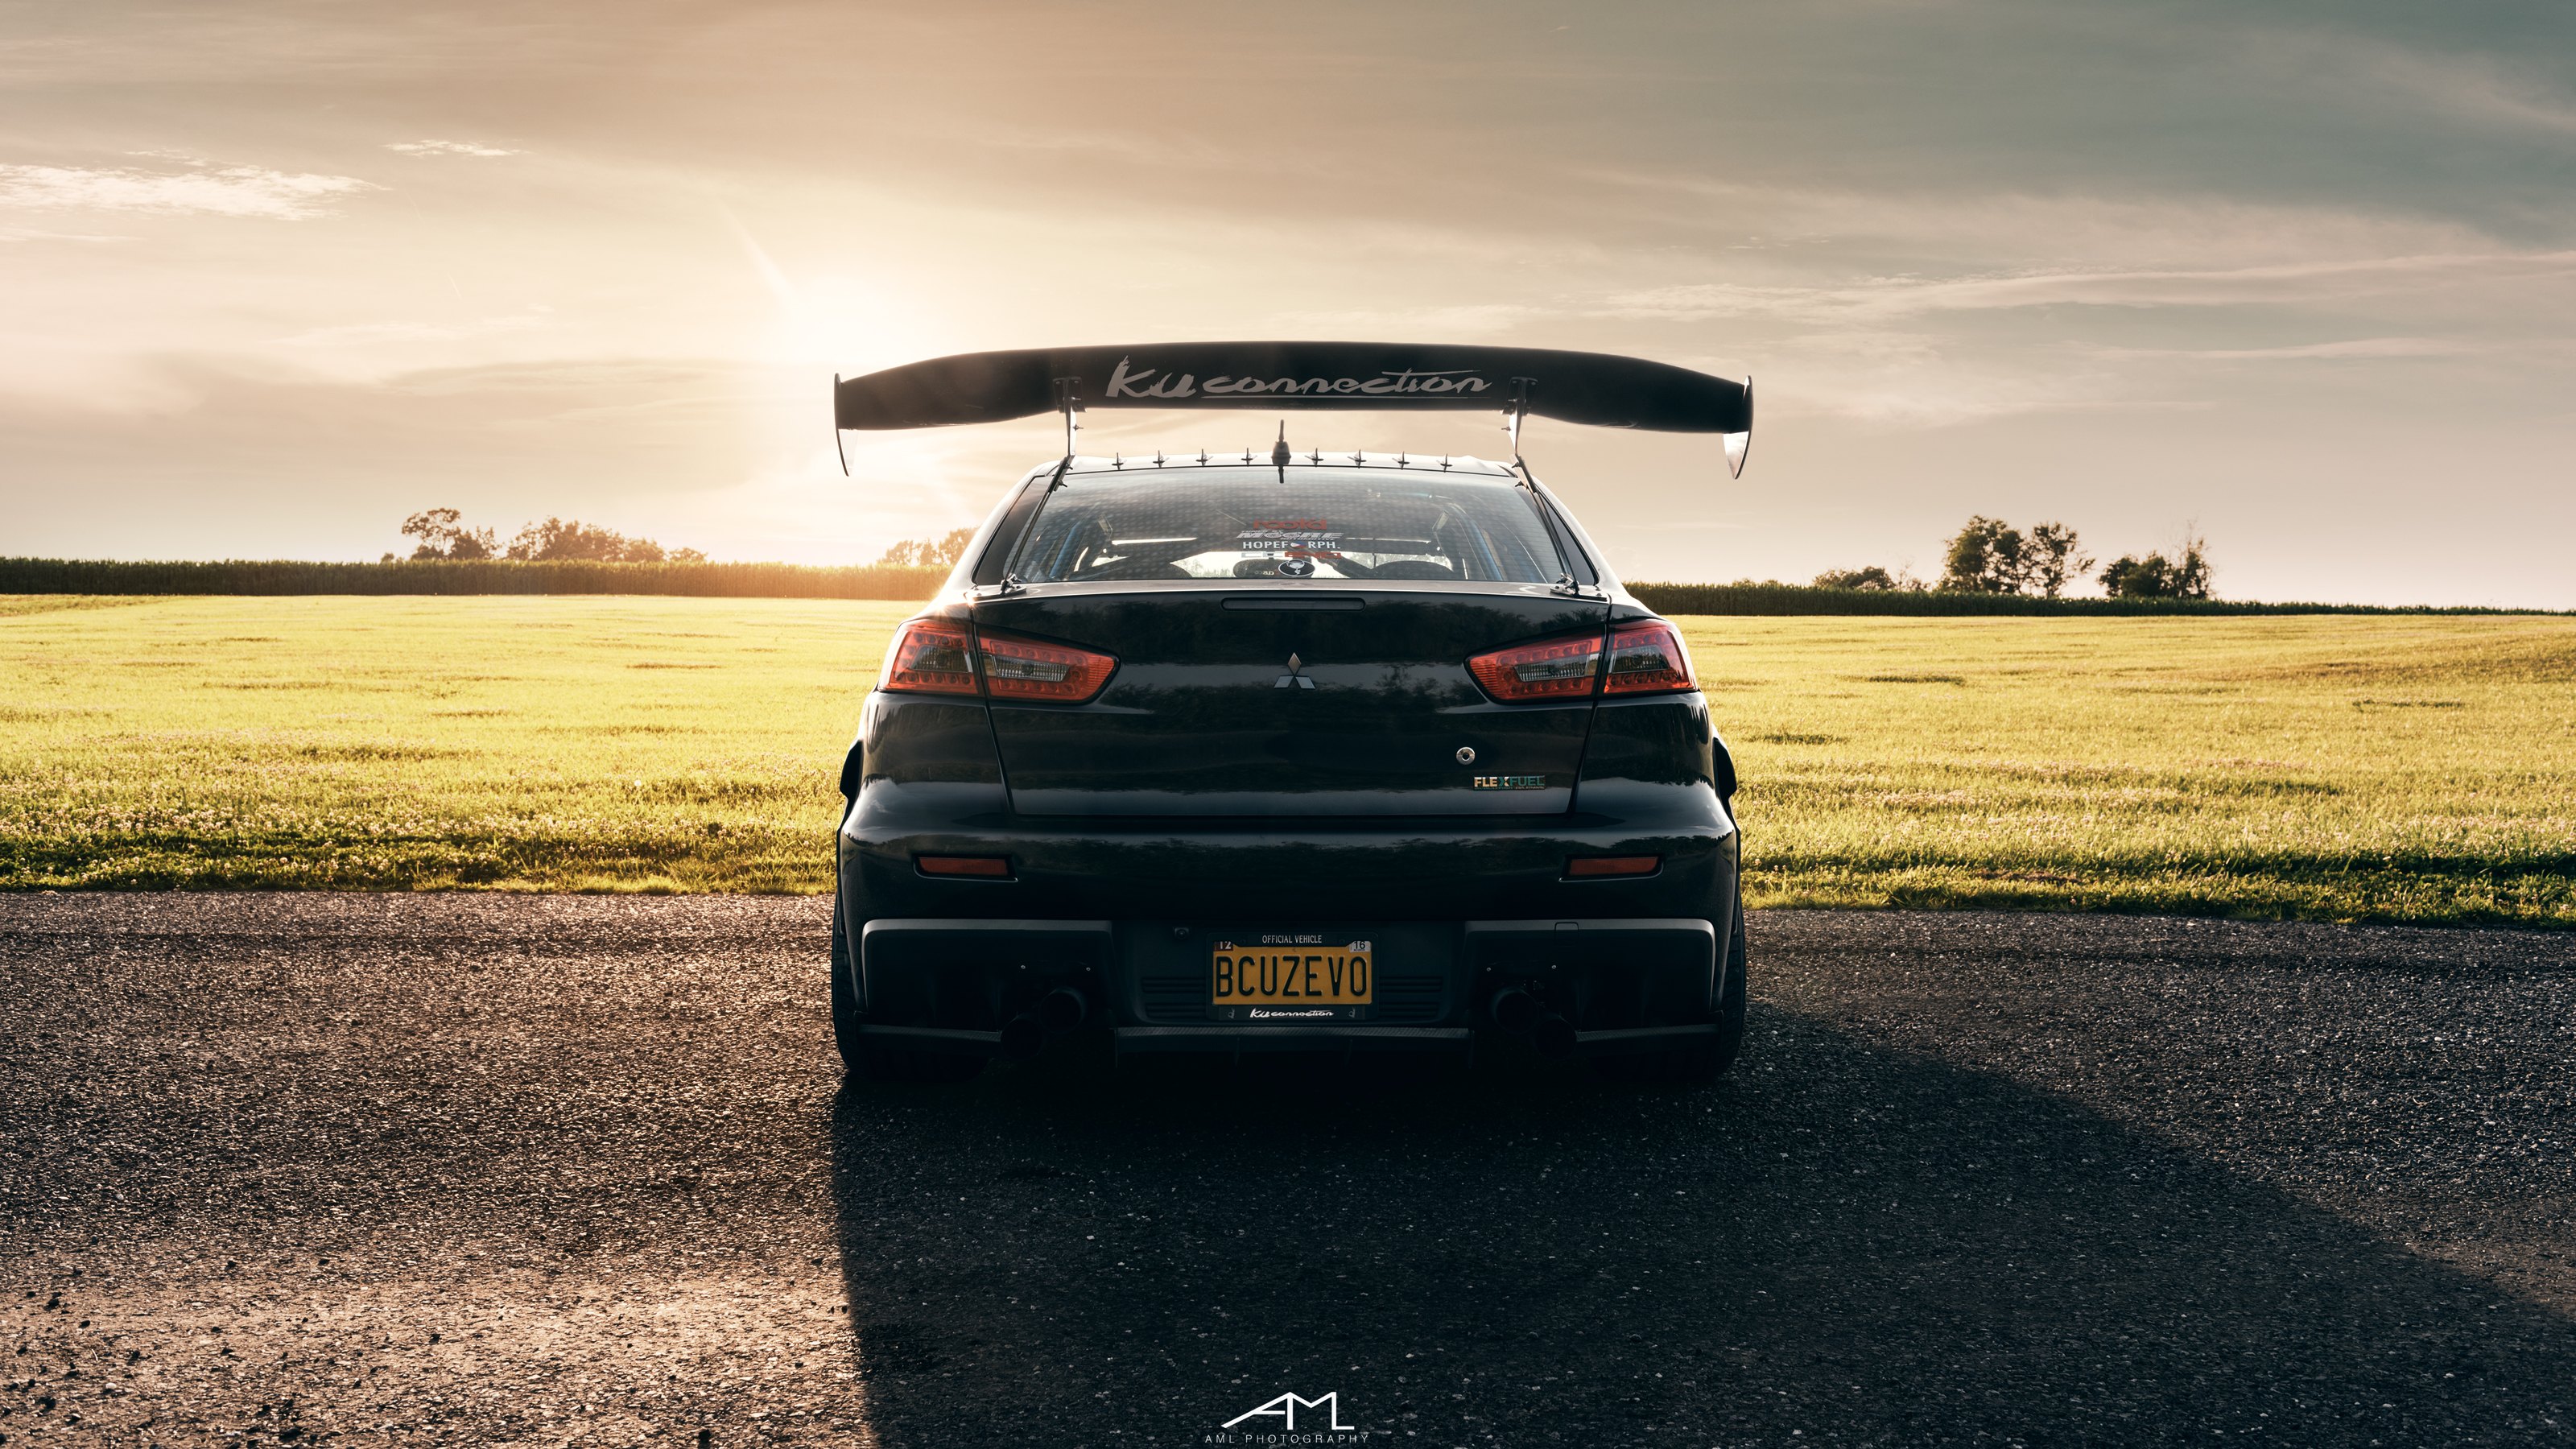 Black Mitsubishi Evolution with Large Wing Spoiler - Photo by Arlen Liverman